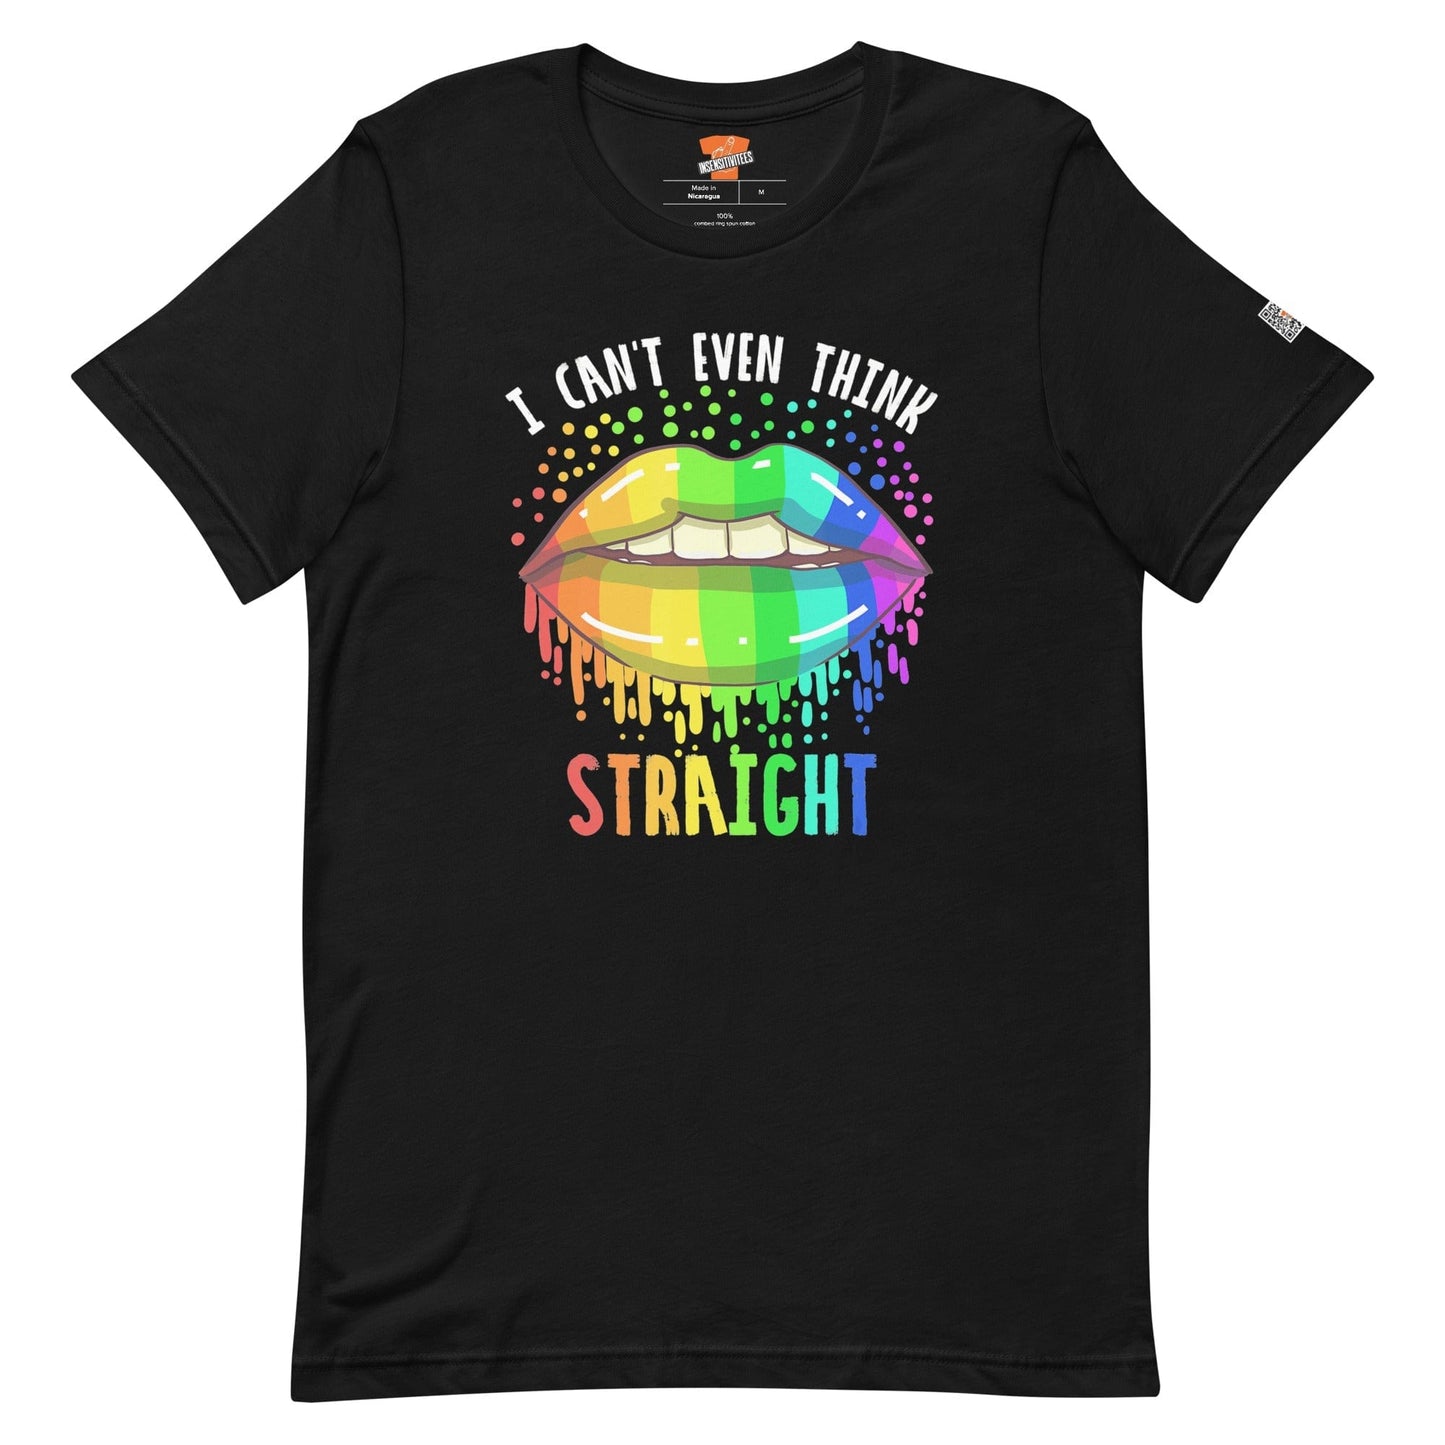 InsensitiviTees™️ Black / XS Can't Think Straight Limited Edition Unisex T-shirt